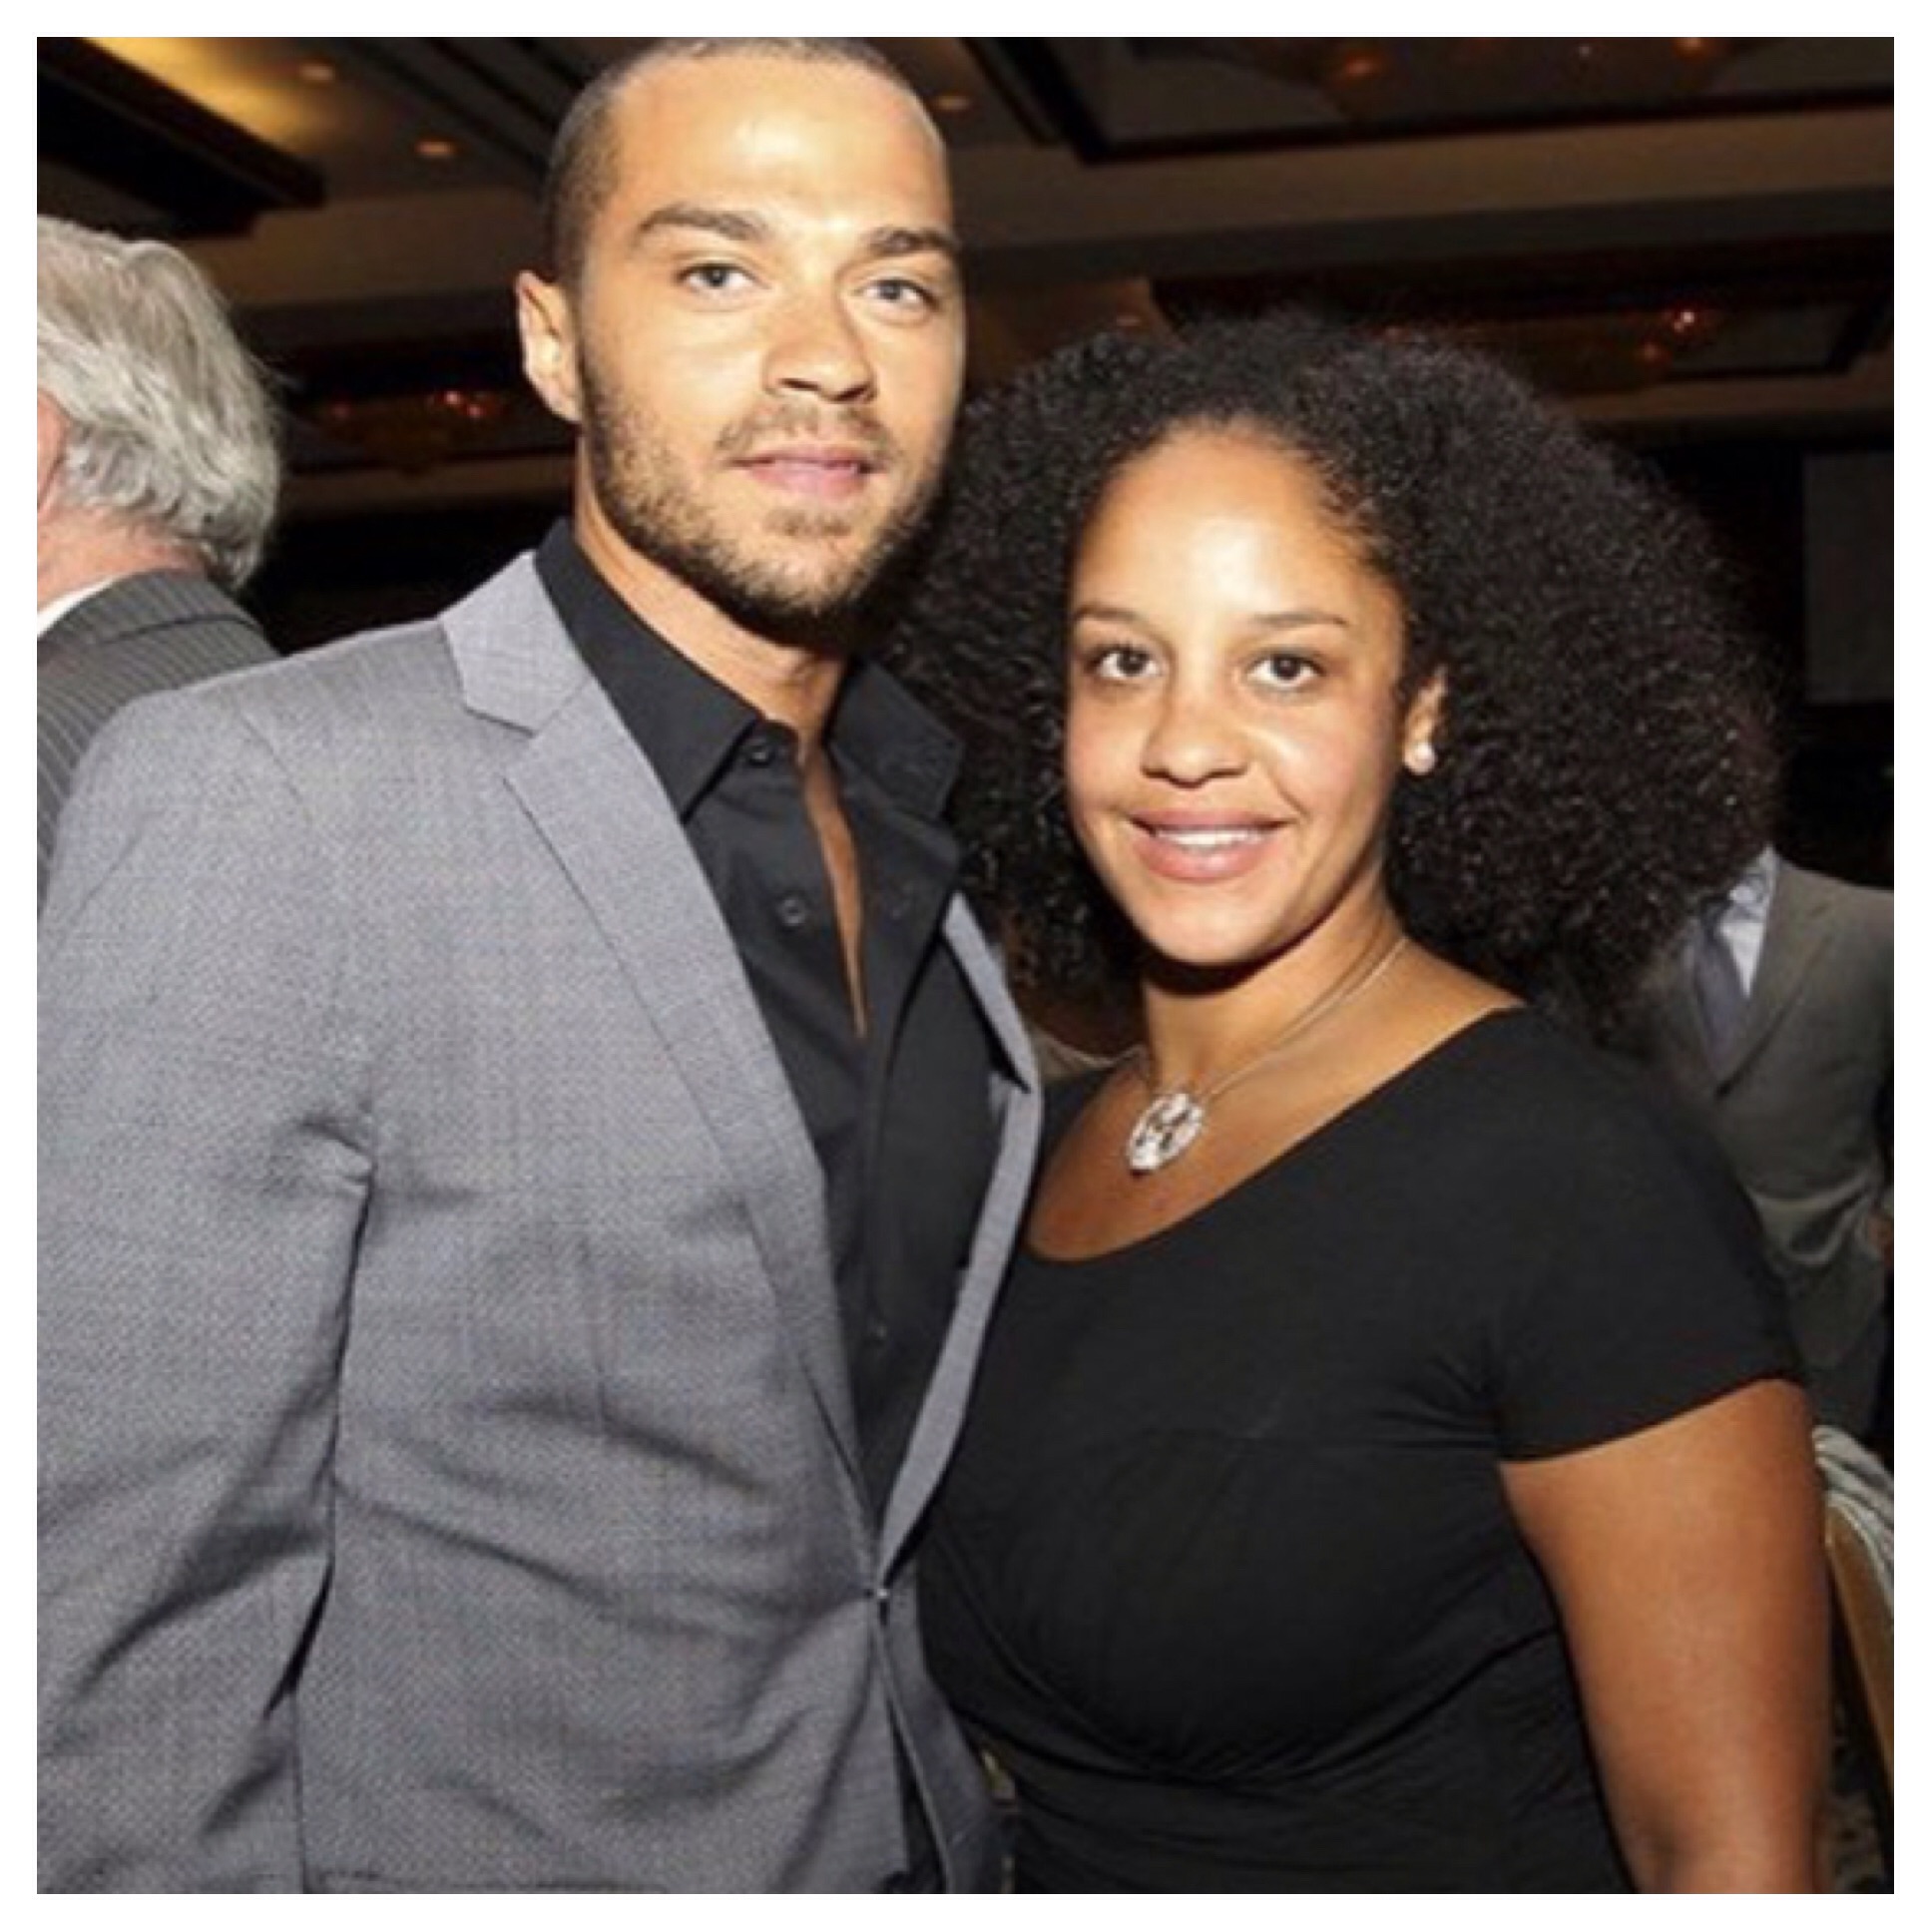 Actor And Activist Jesse Williams Has Filed For Divorce From Wife Of 5 Years.